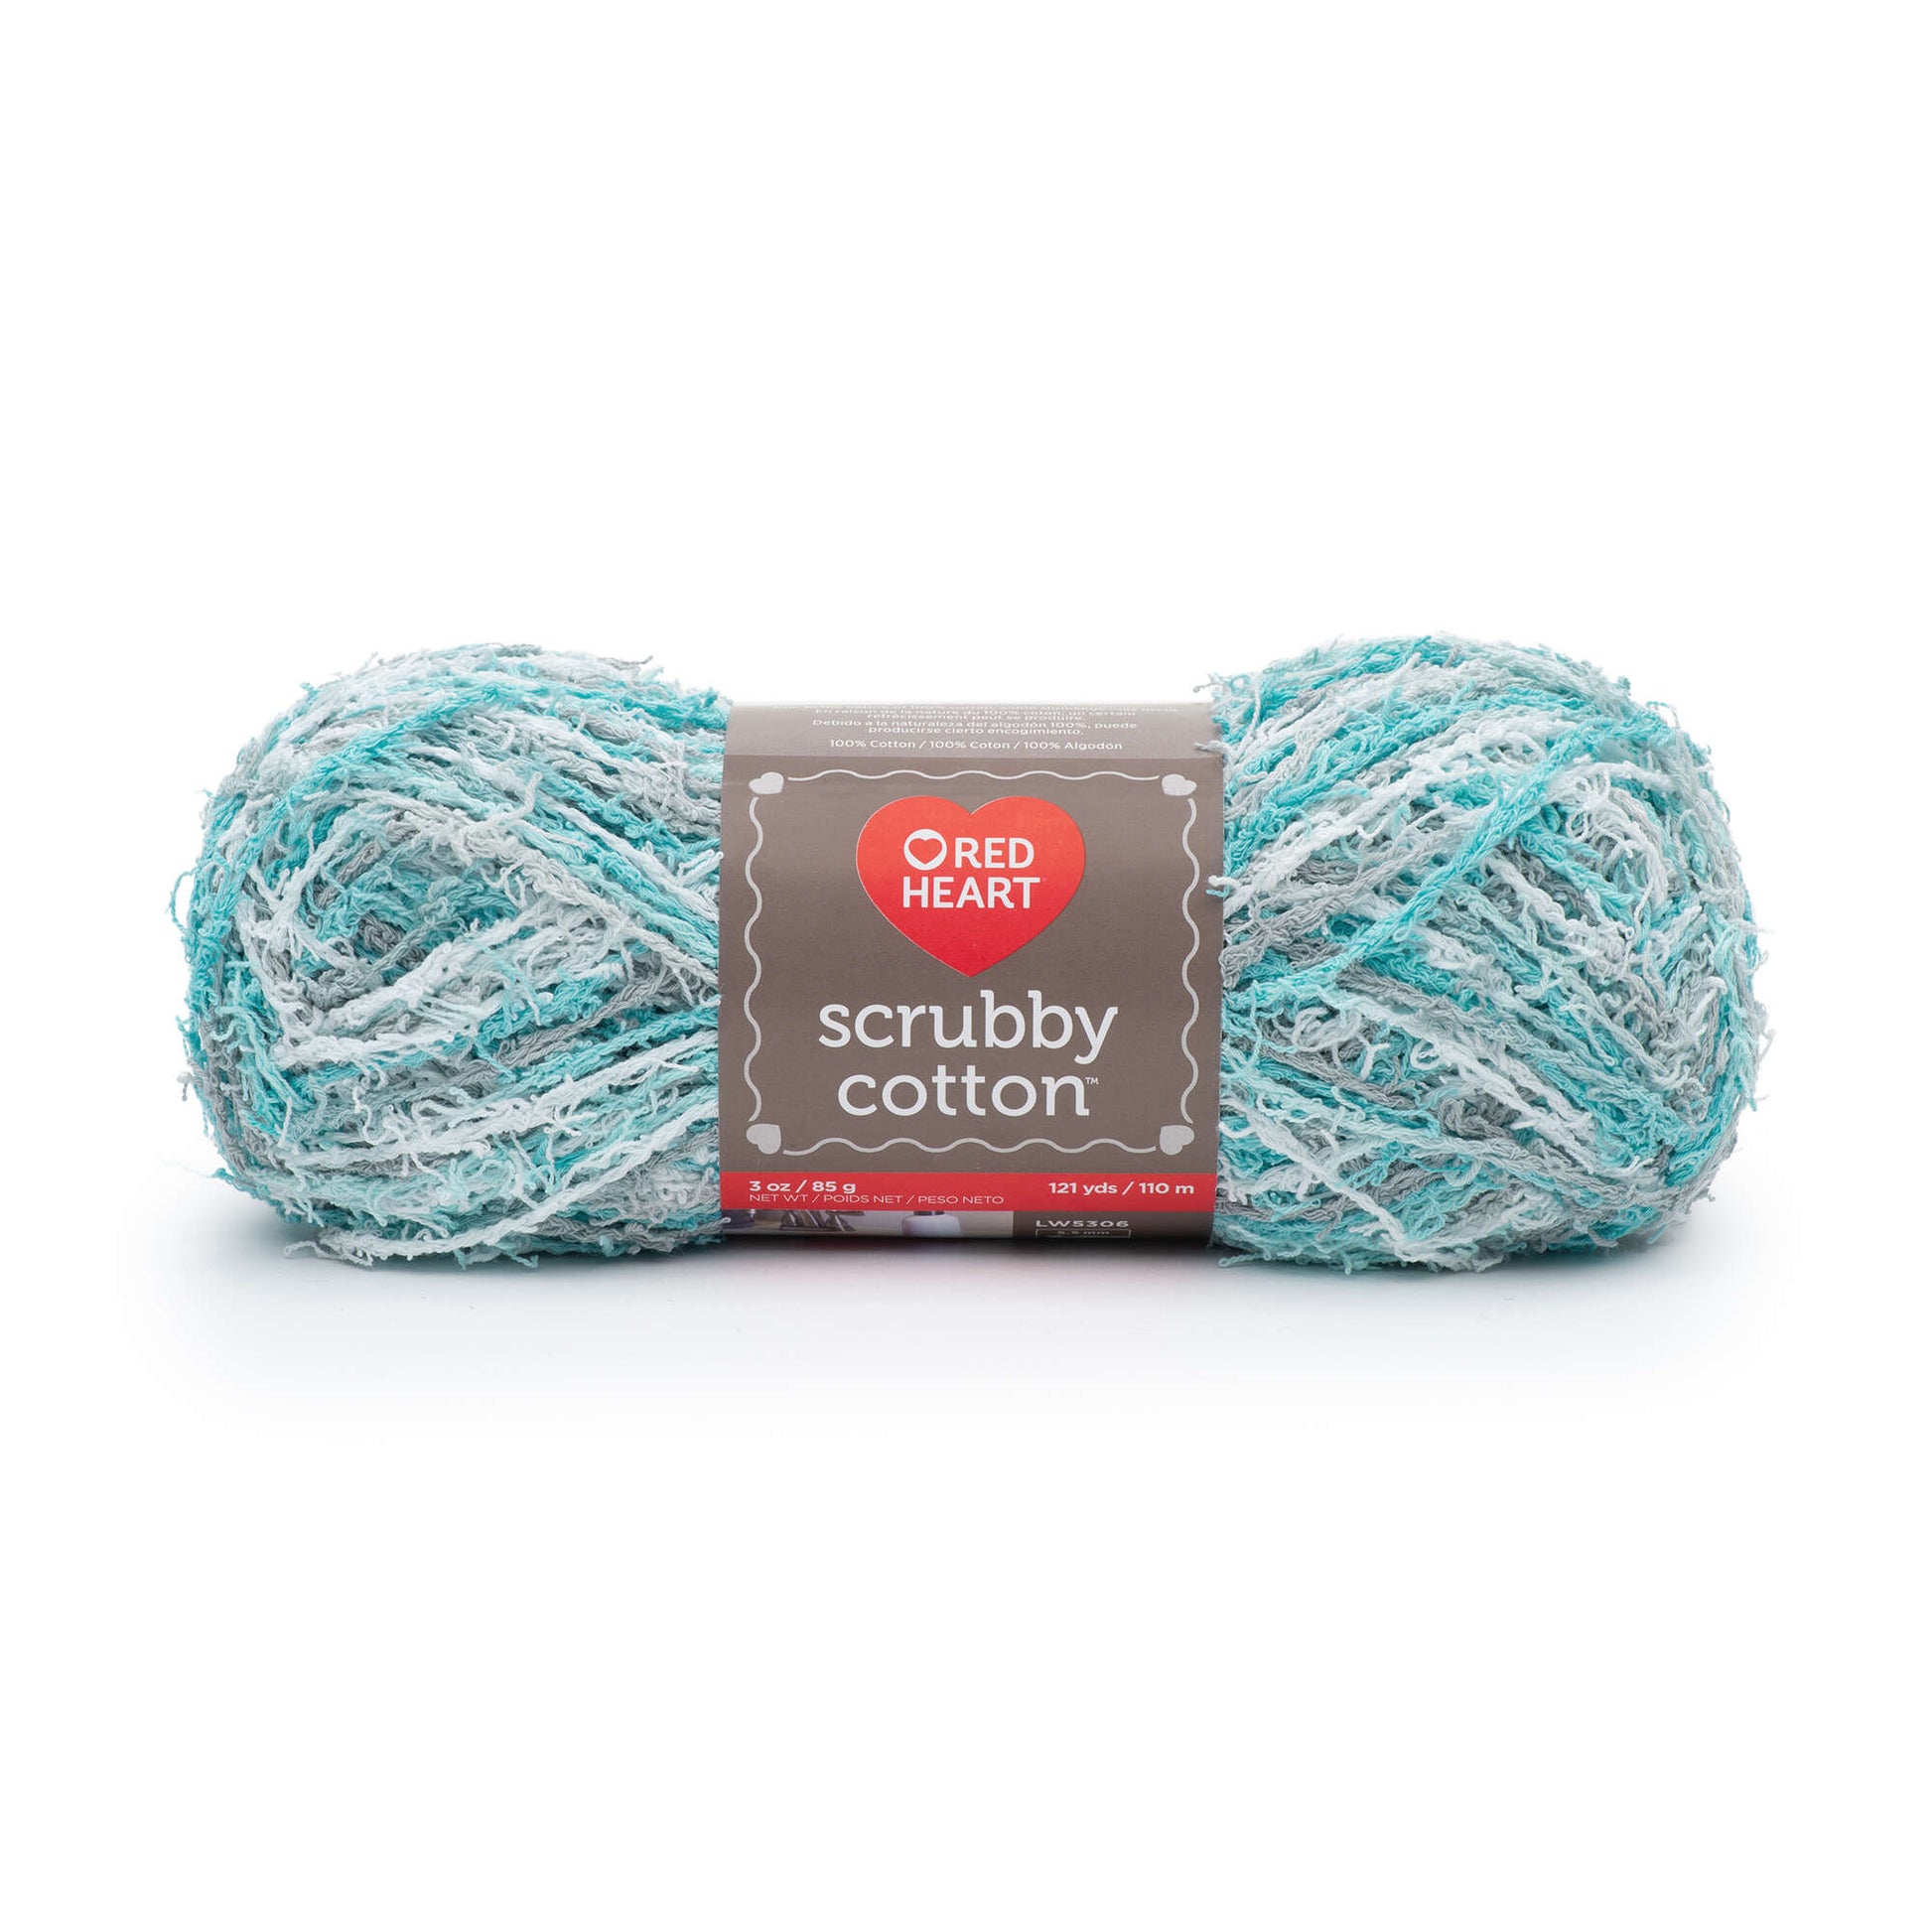 Red Heart Scrubby Cotton Yarn - Clearance shades Refreshing